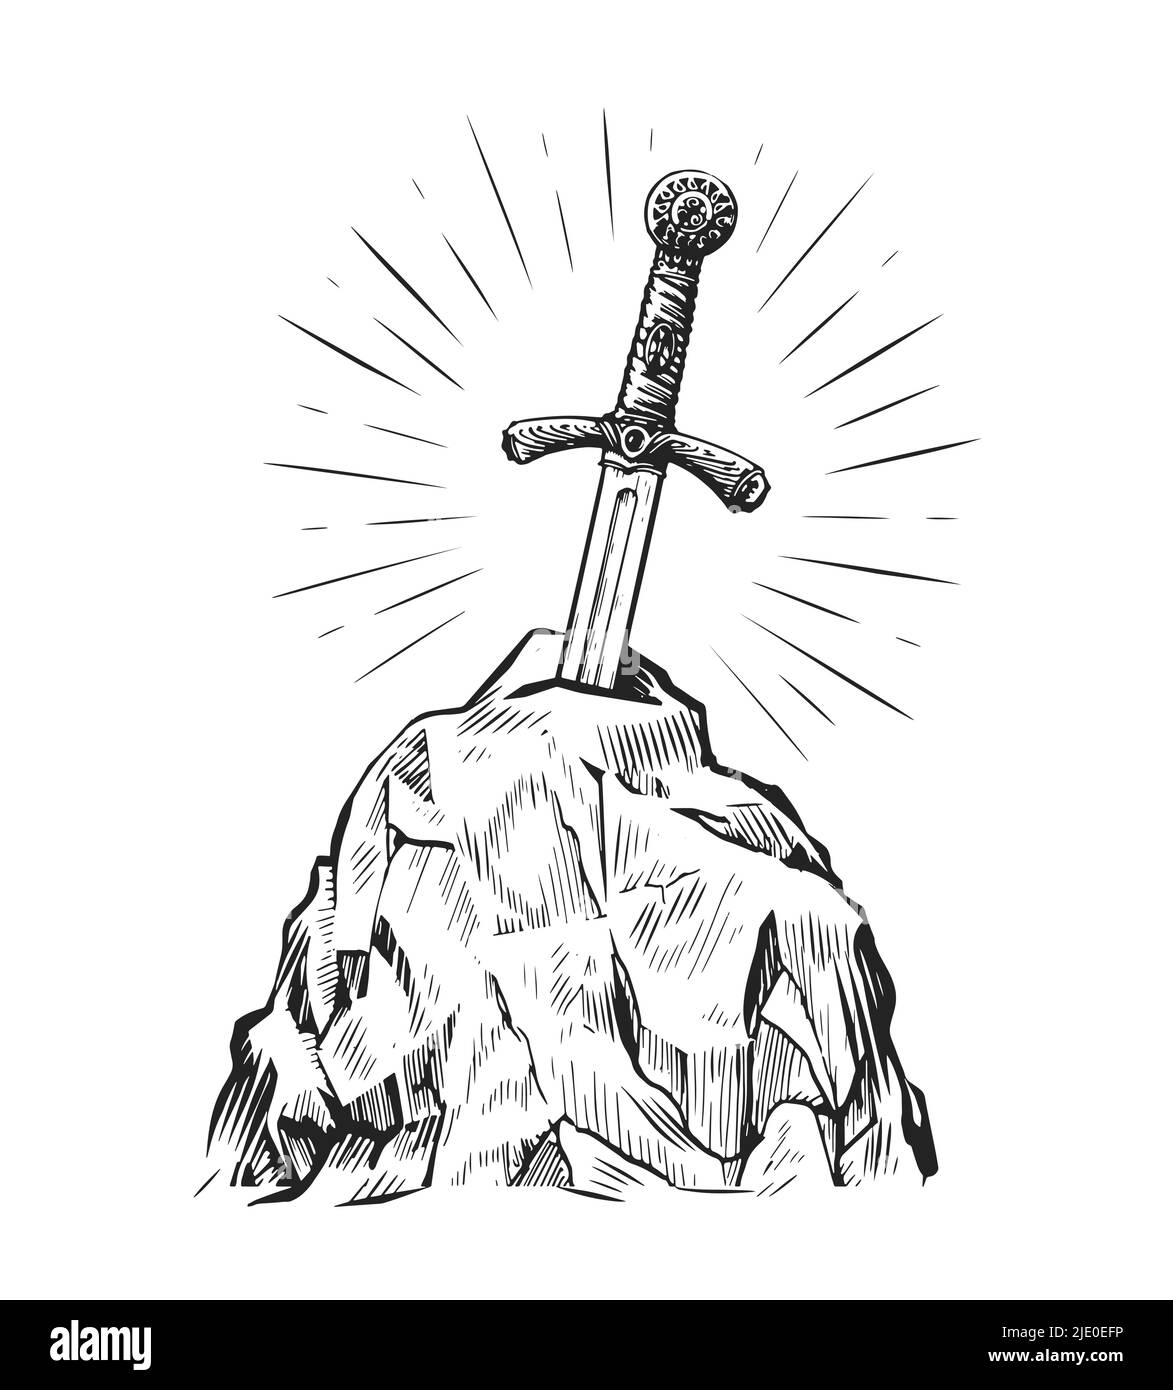 Sword in the stone Cut Out Stock Images & Pictures - Alamy